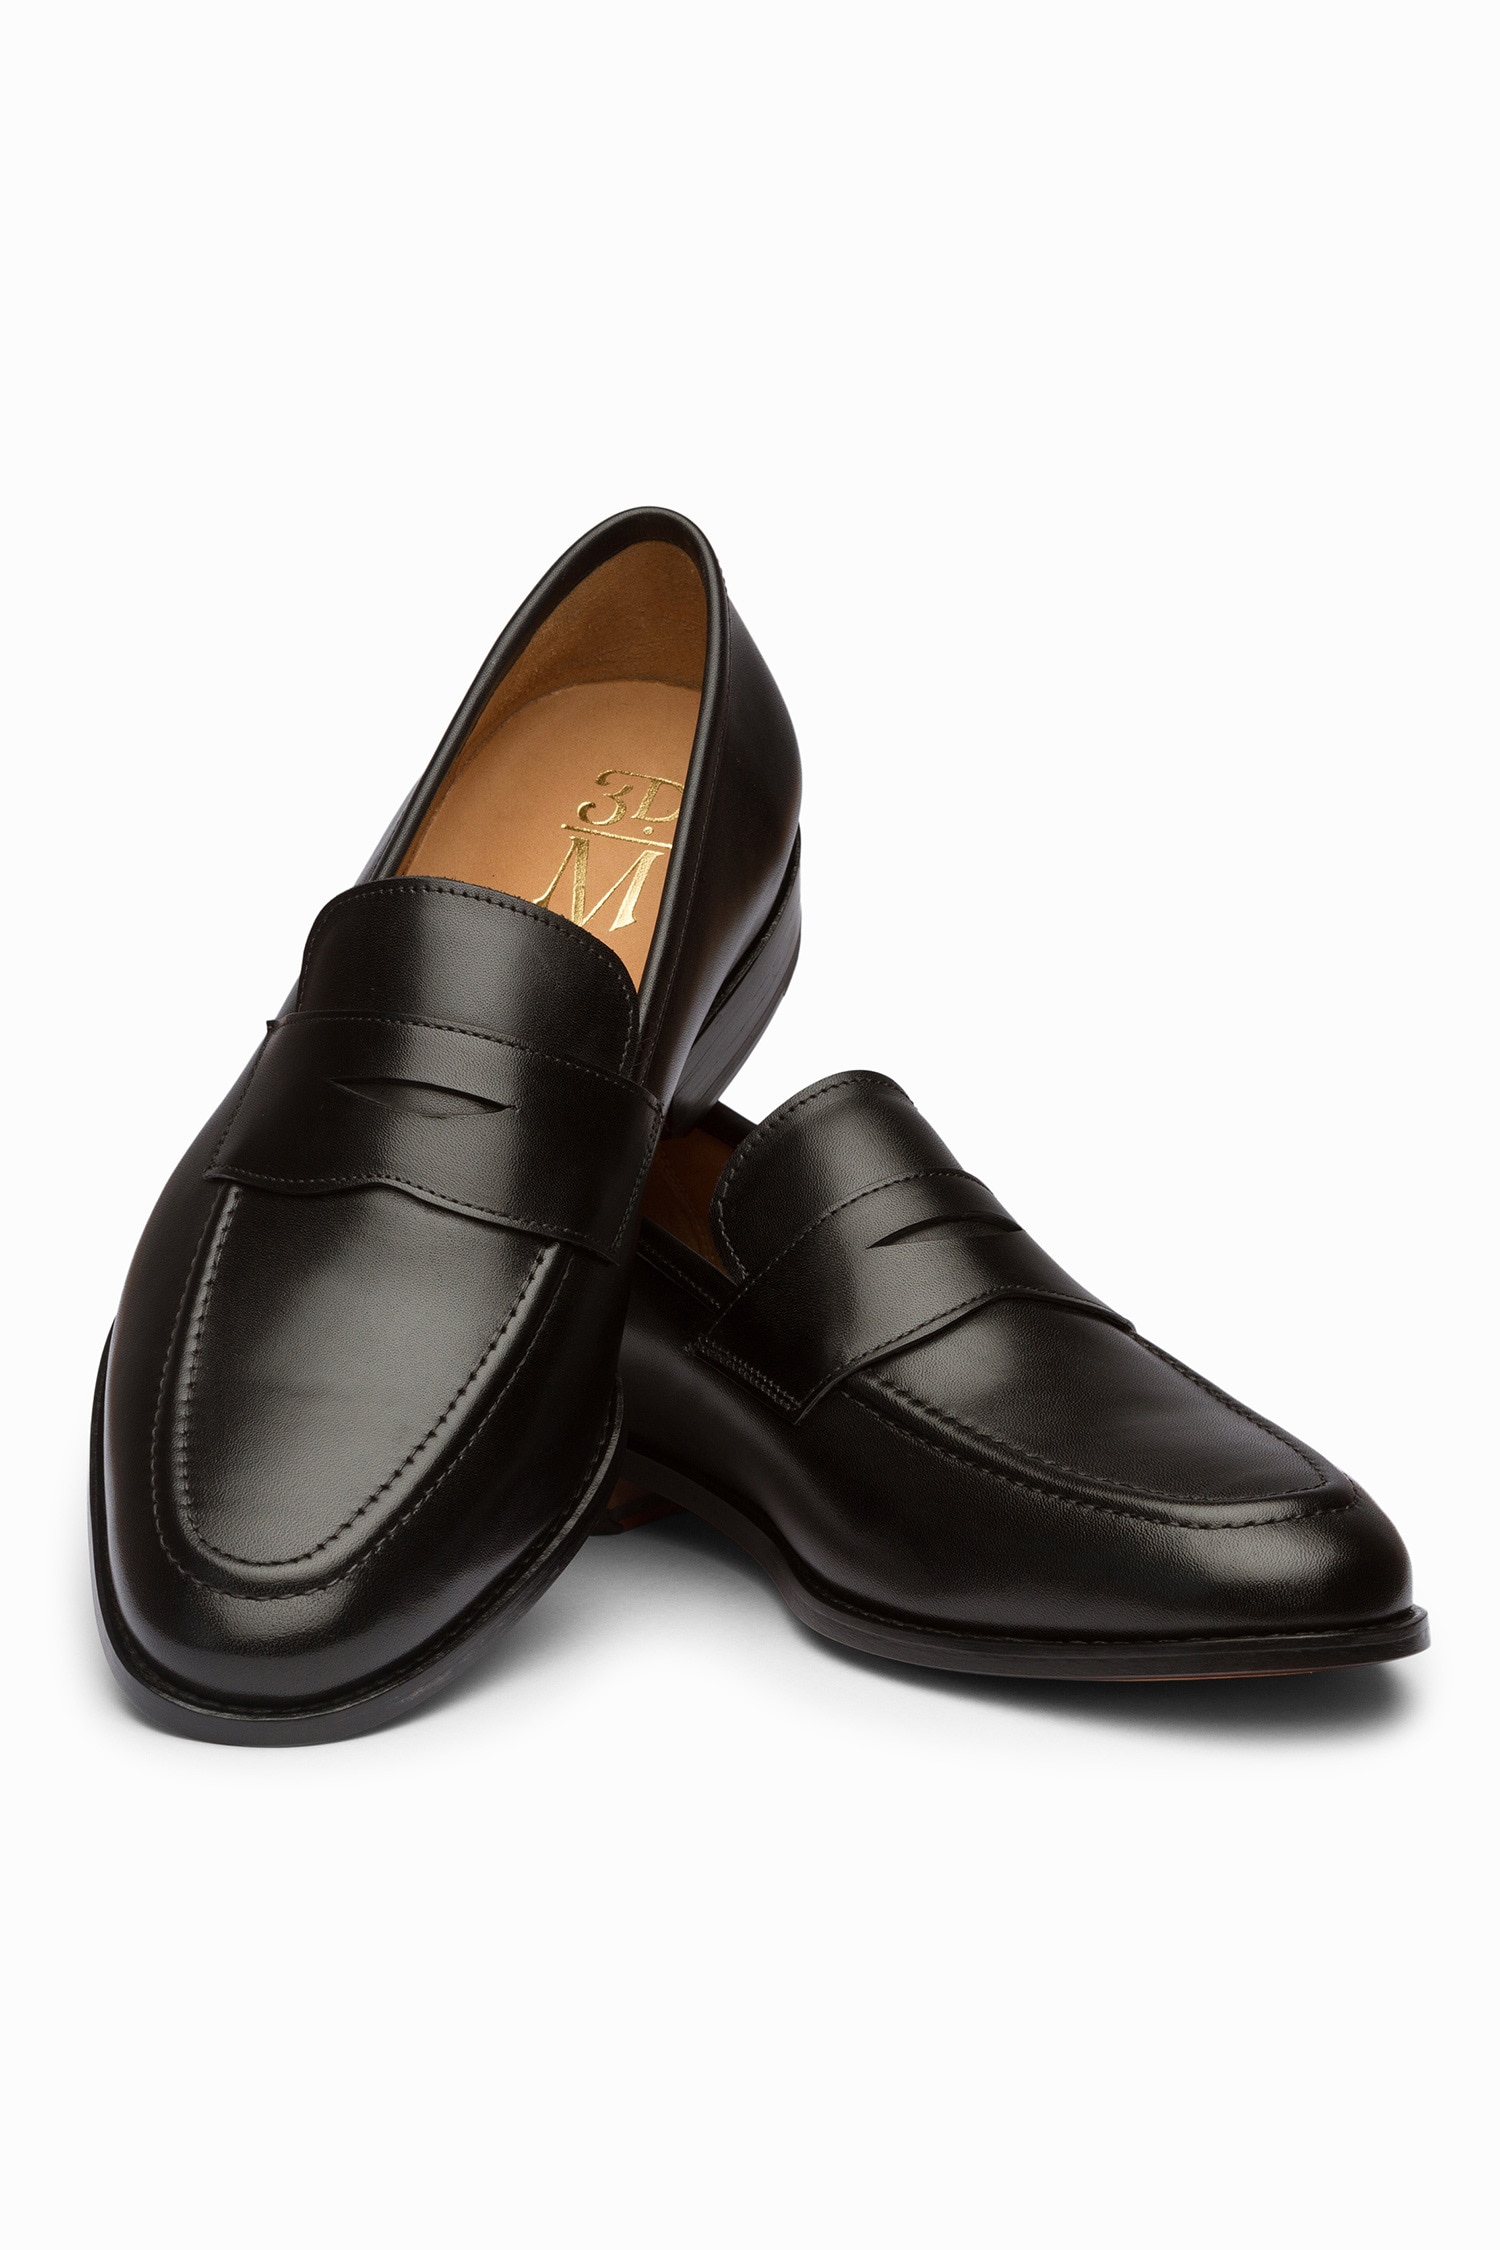 Buy Black Penny Loafers For Men by 3DM LIFESTYLE Online at Aza Fashions.